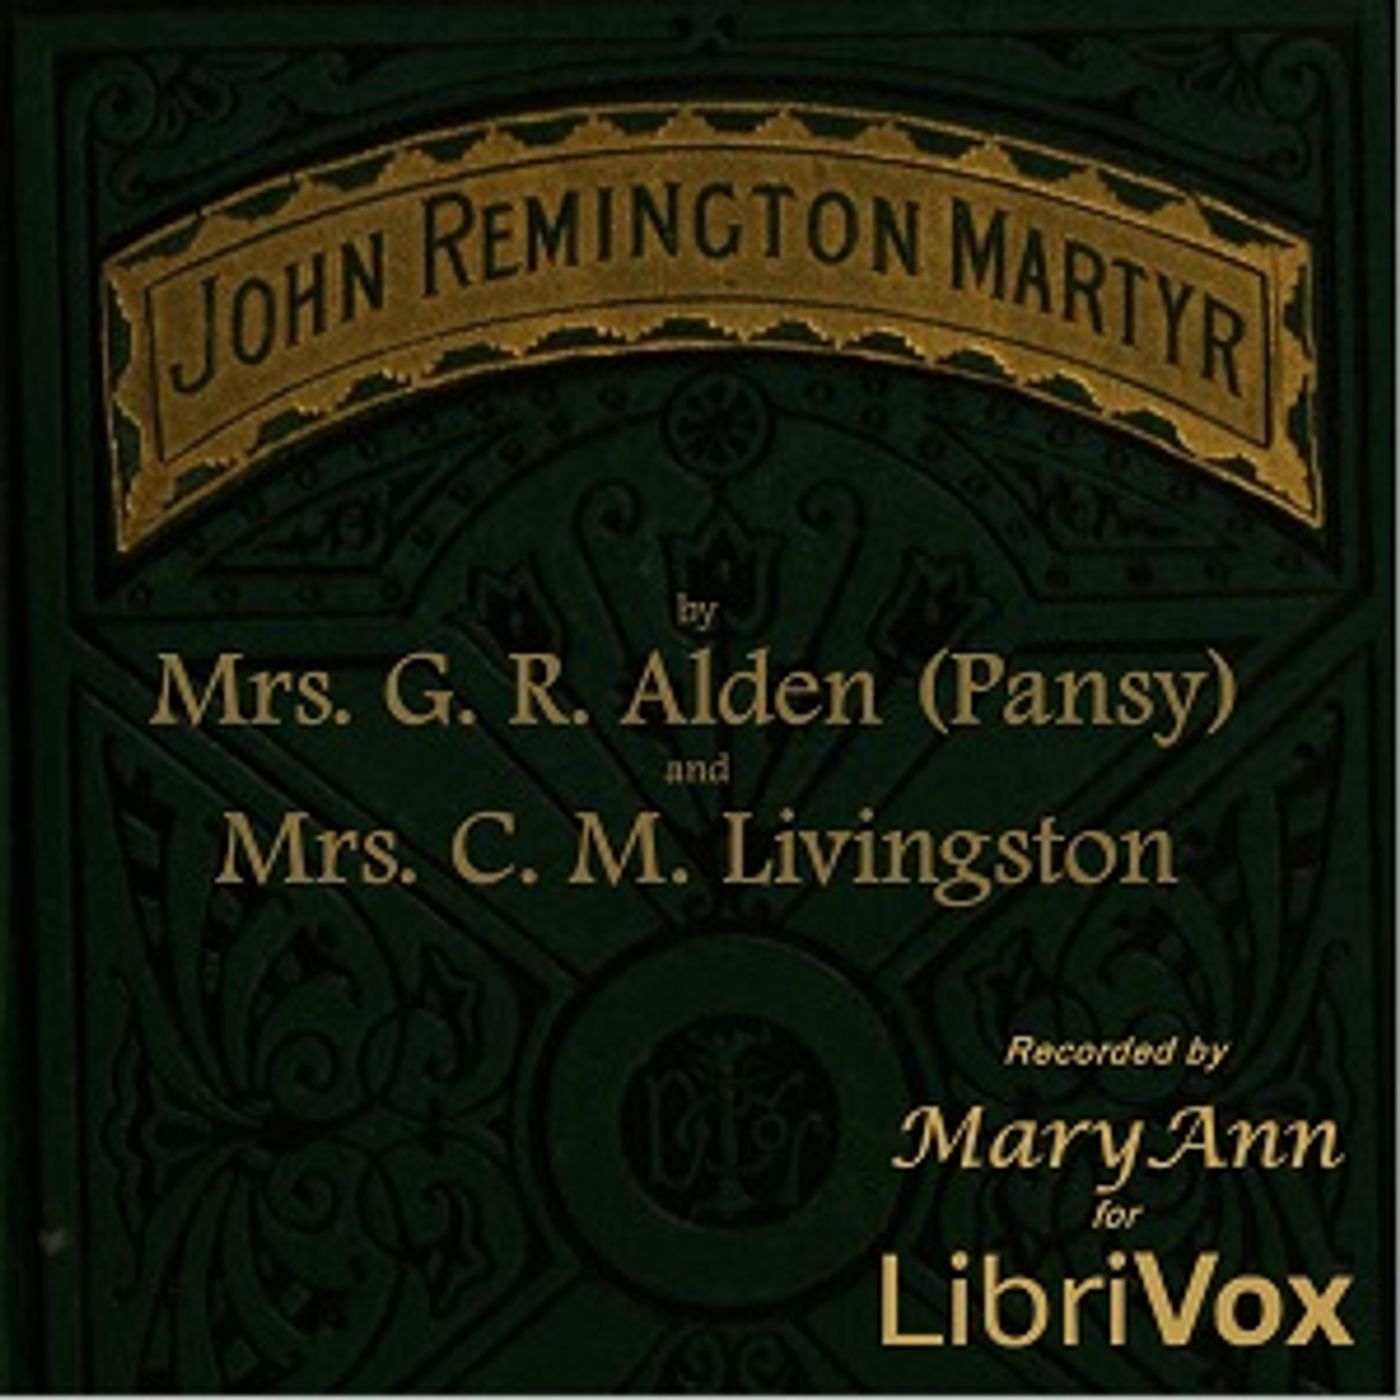 John Remington, Martyr by Pansy (1841 – 1930) and Mrs. C. M. Livingston (1832 – 1924)